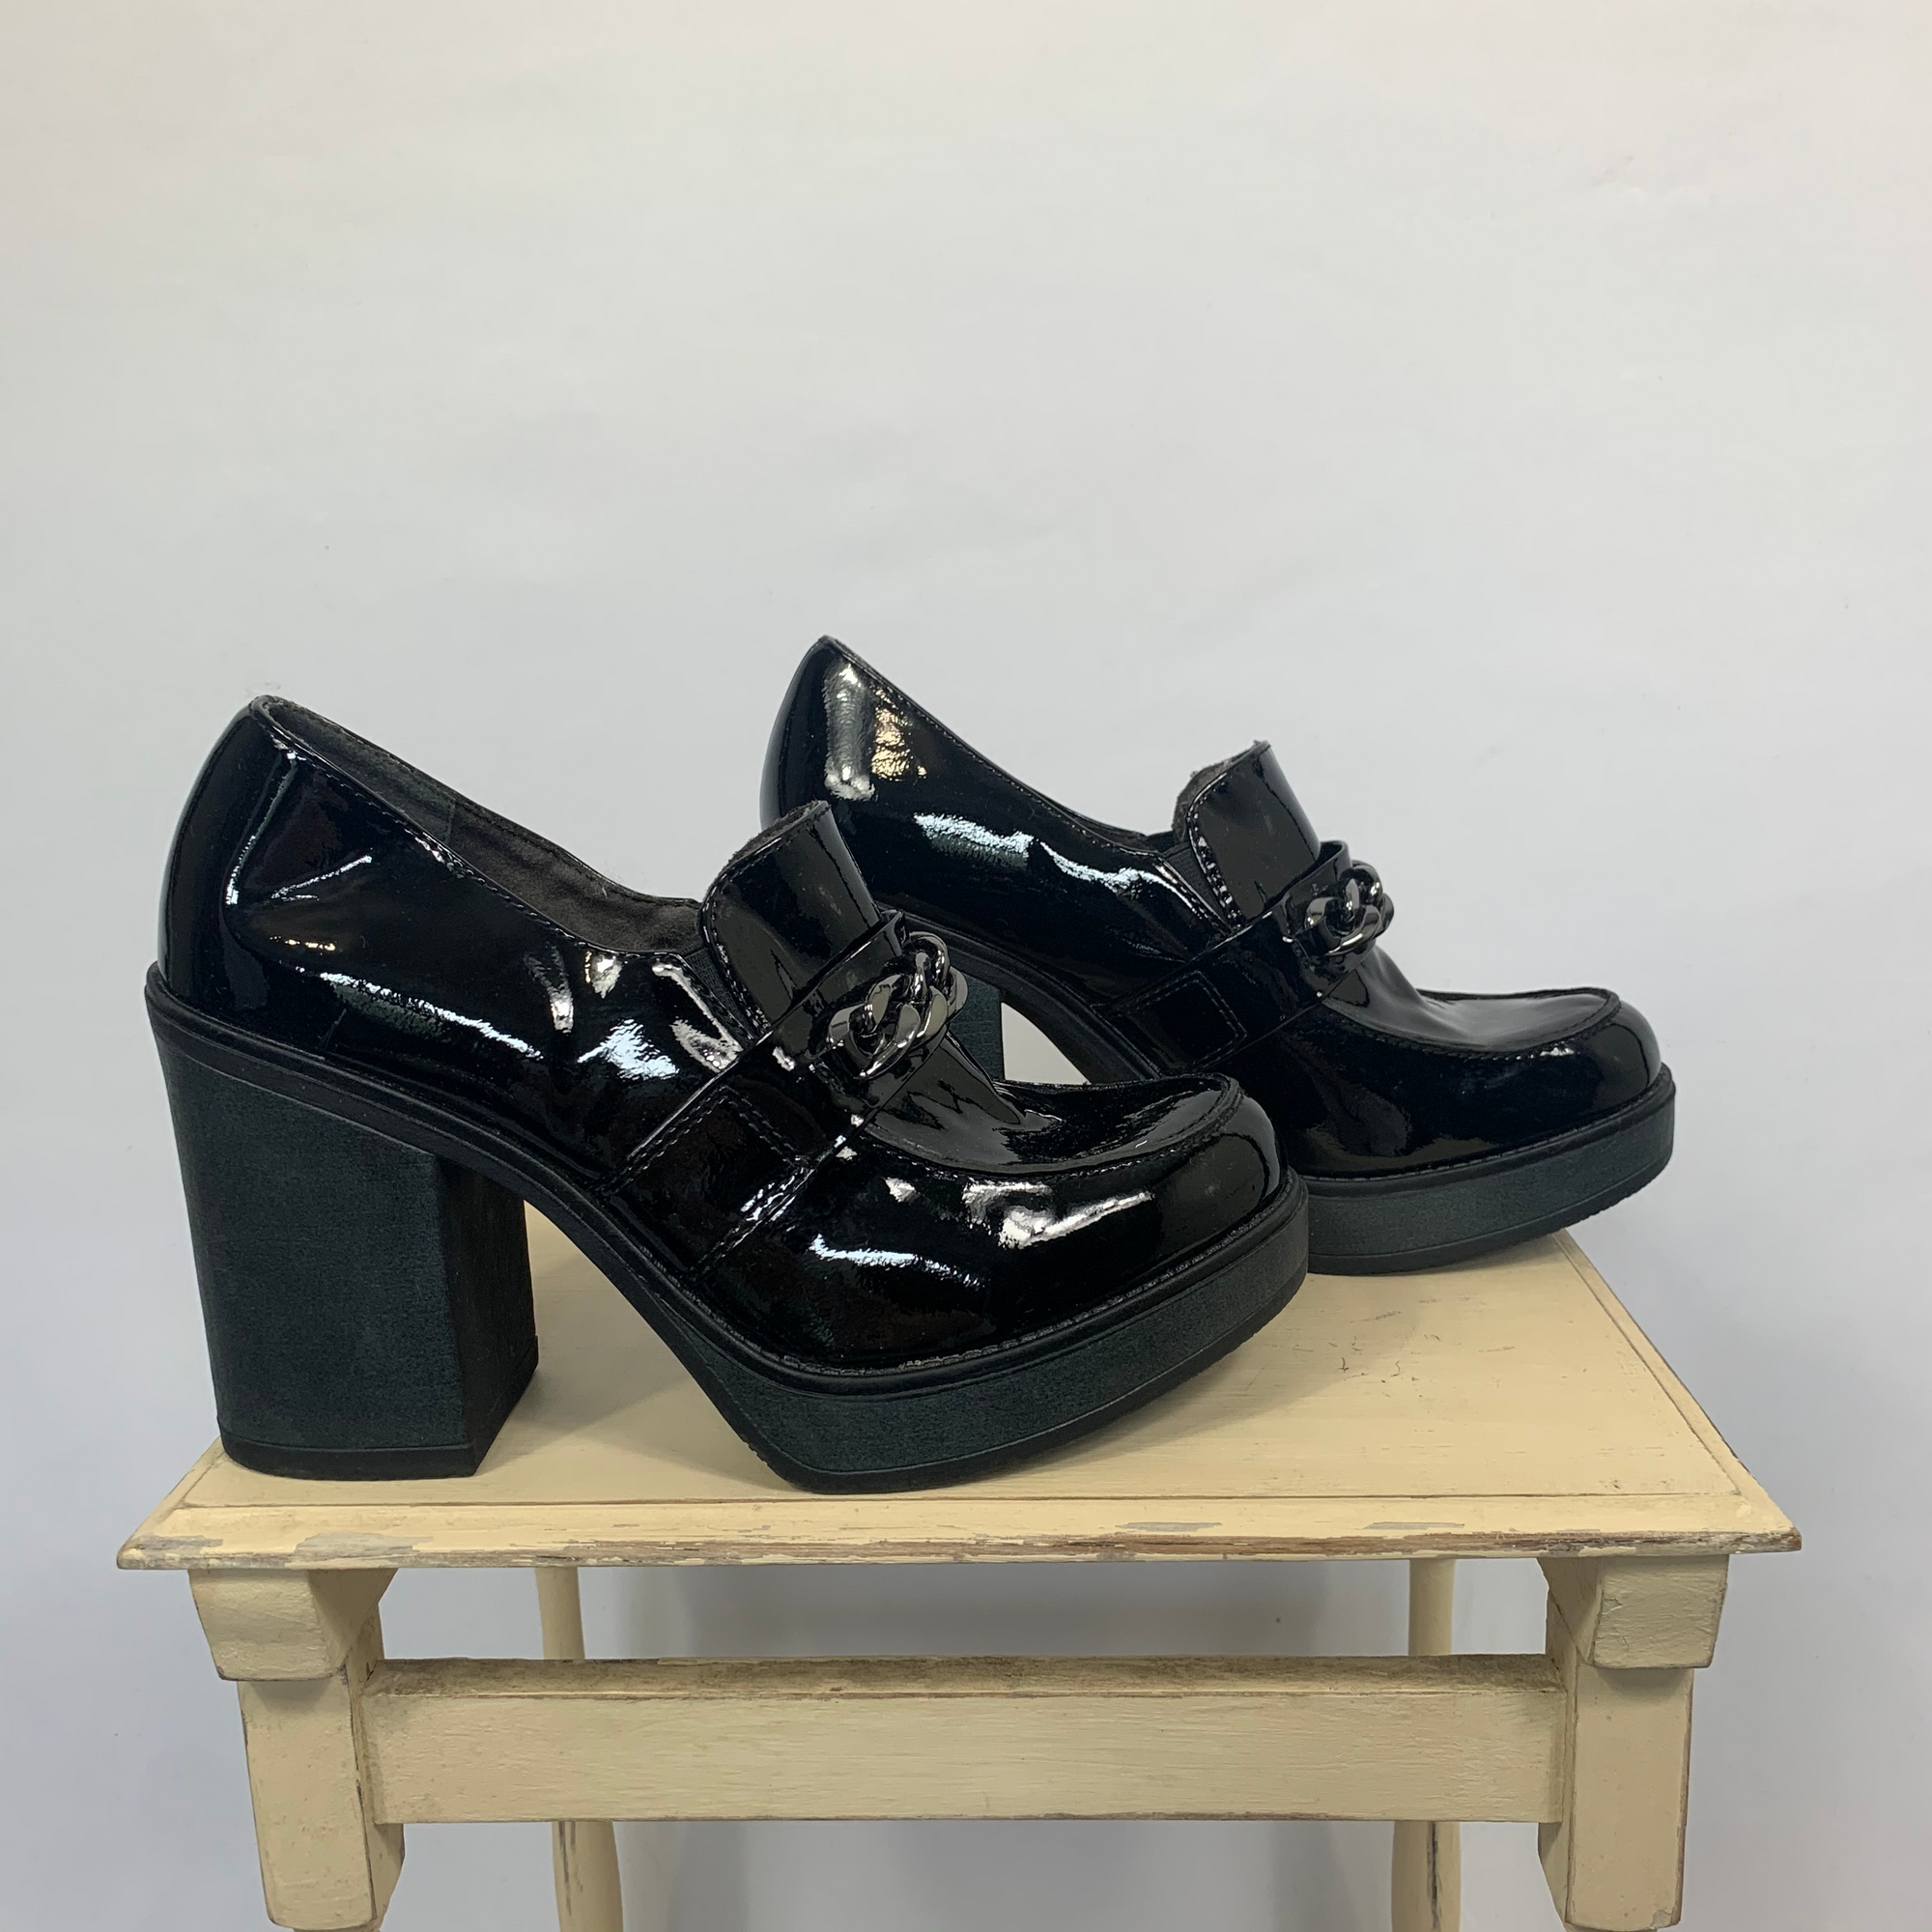 VINTAGE CHUNKY SHOES IN SHINY BLACK With Chain - SIZE UK7/EU40 - 4" Heel